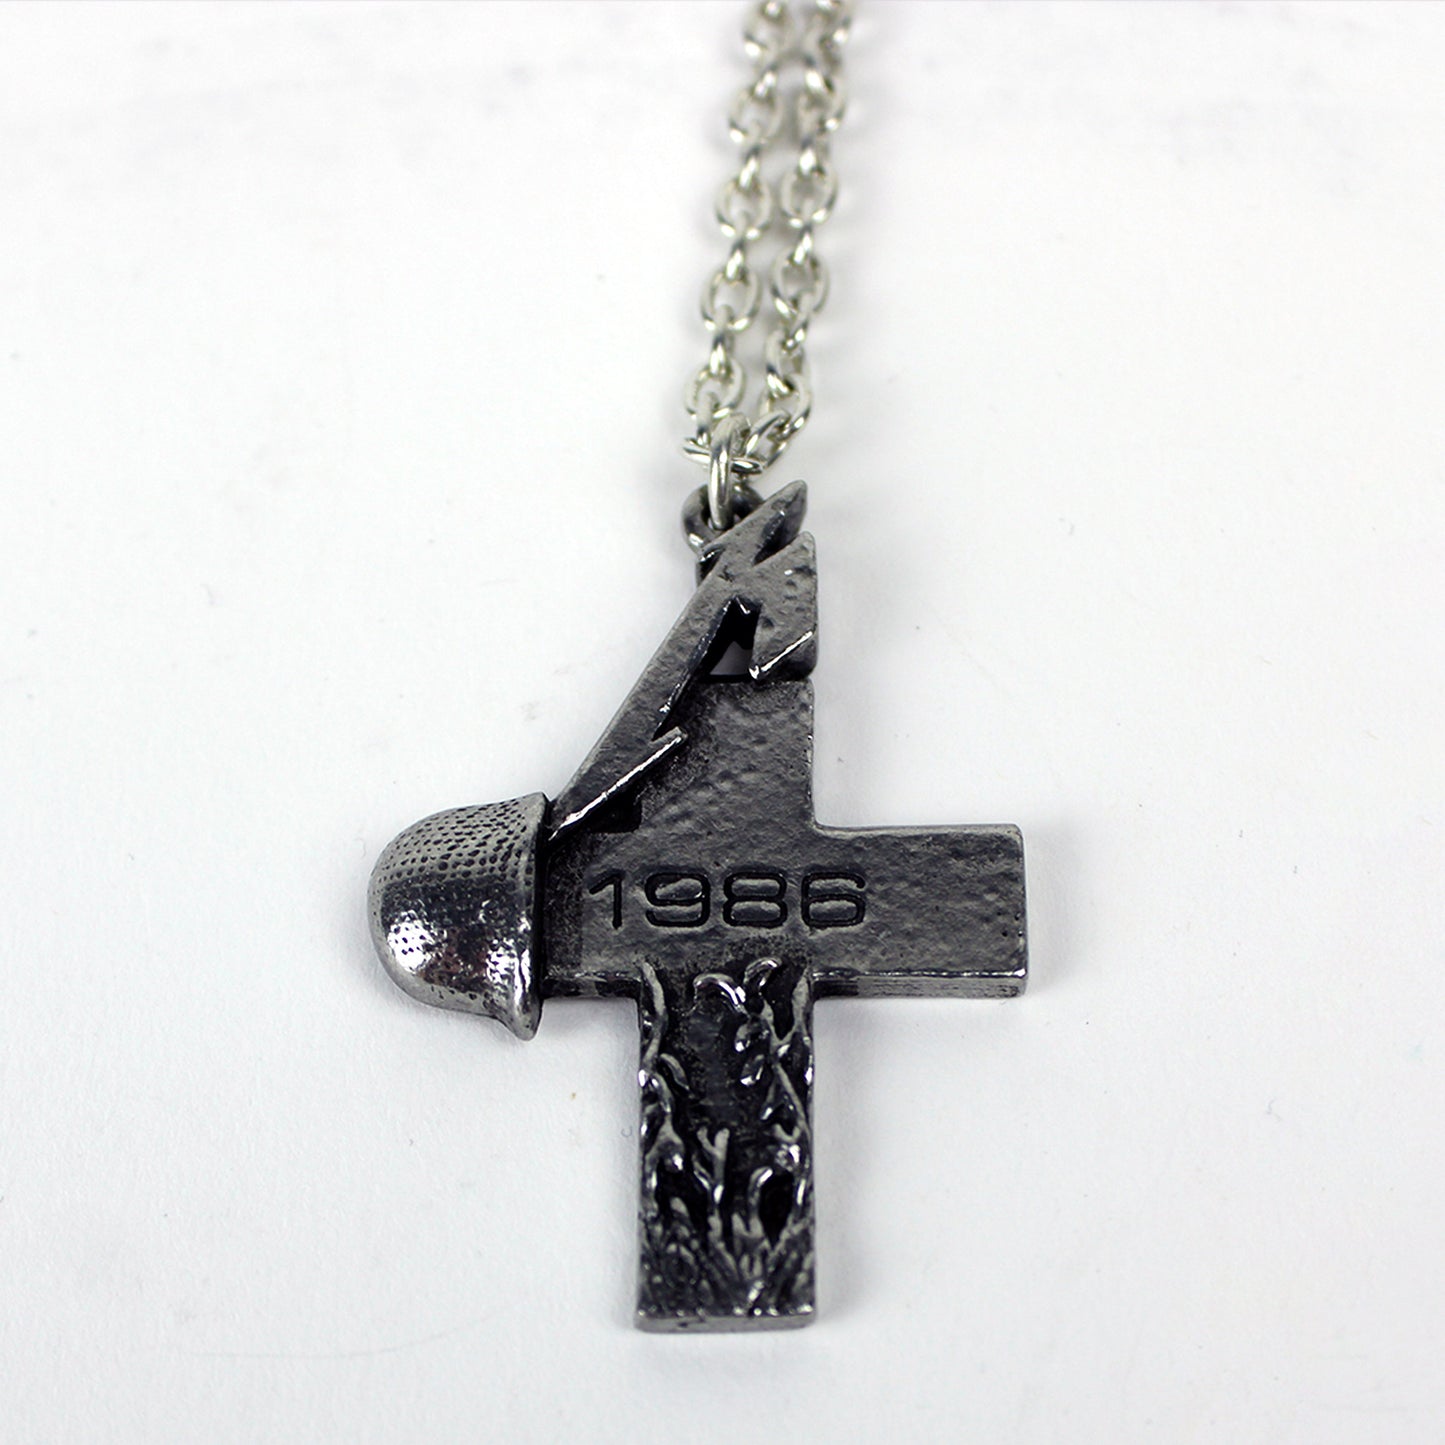 Metallica Master of Puppets 1986 Cross Necklace